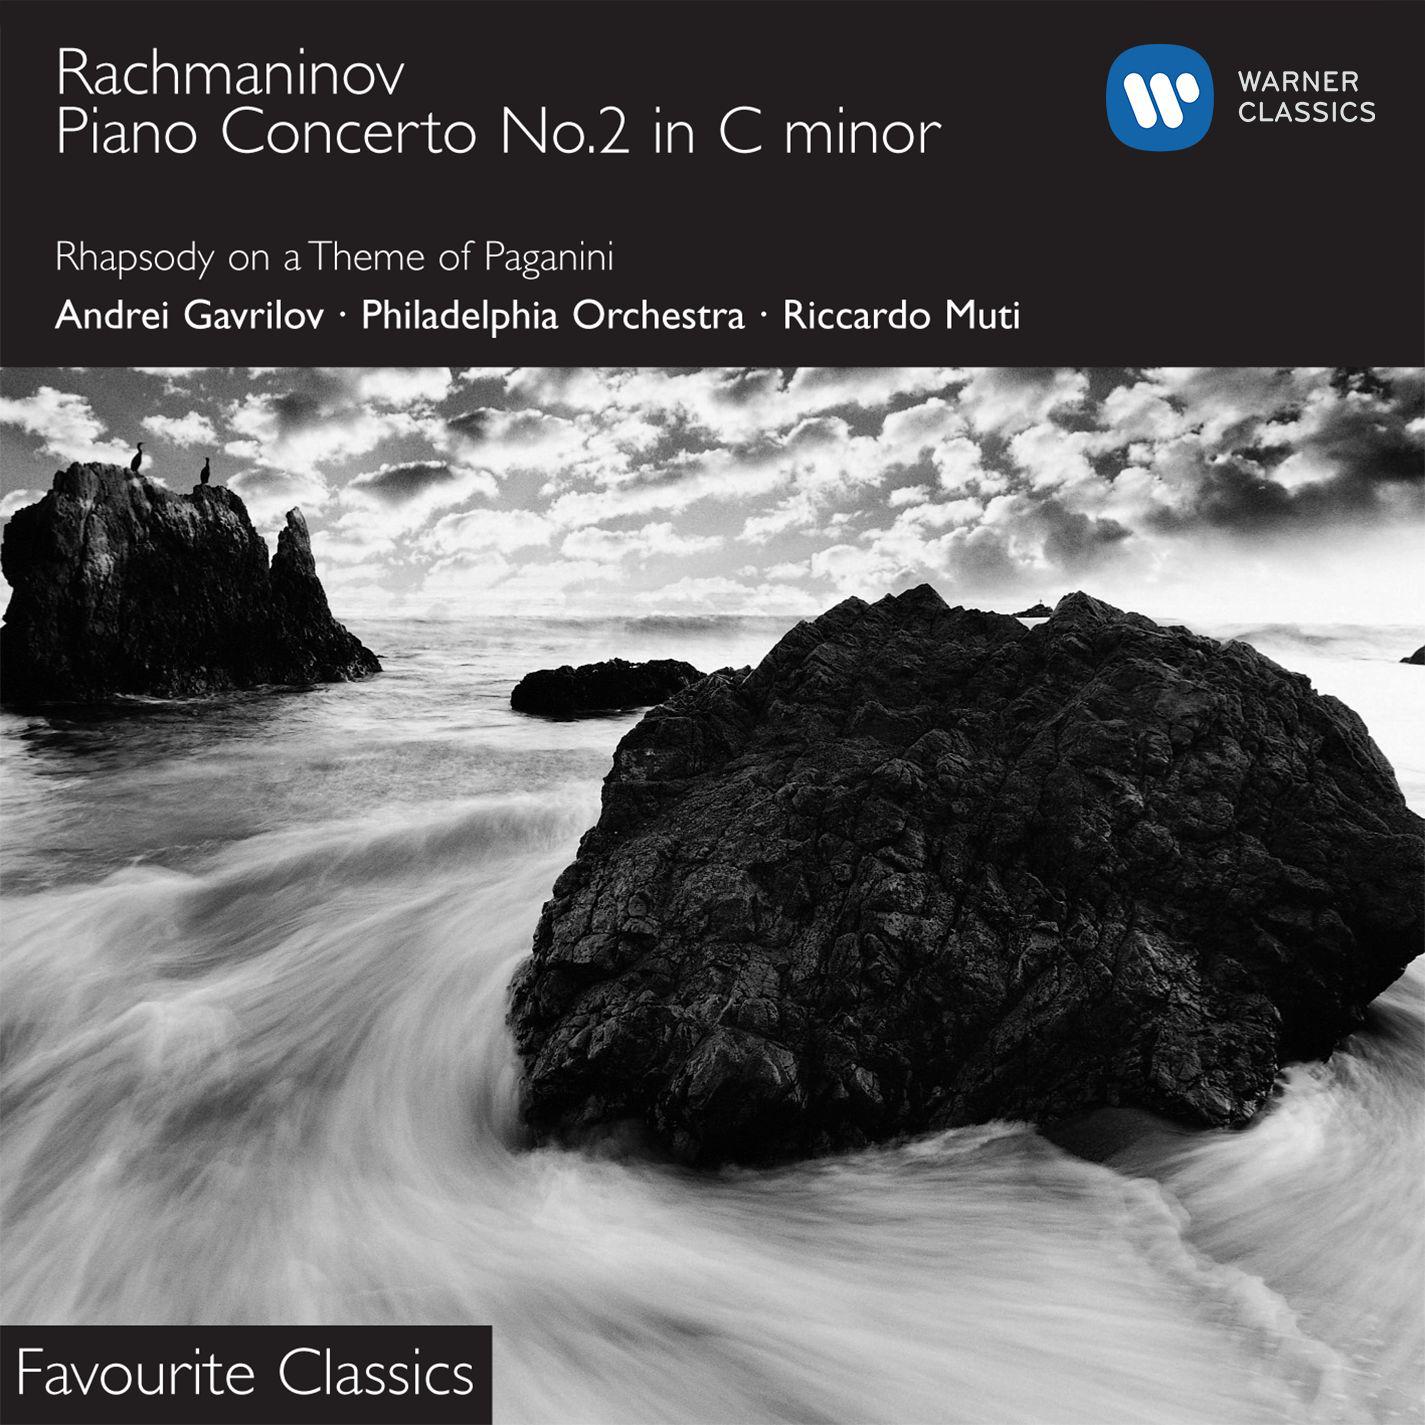 Rhapsody on a Theme of Paganini Op. 43: Variation IV